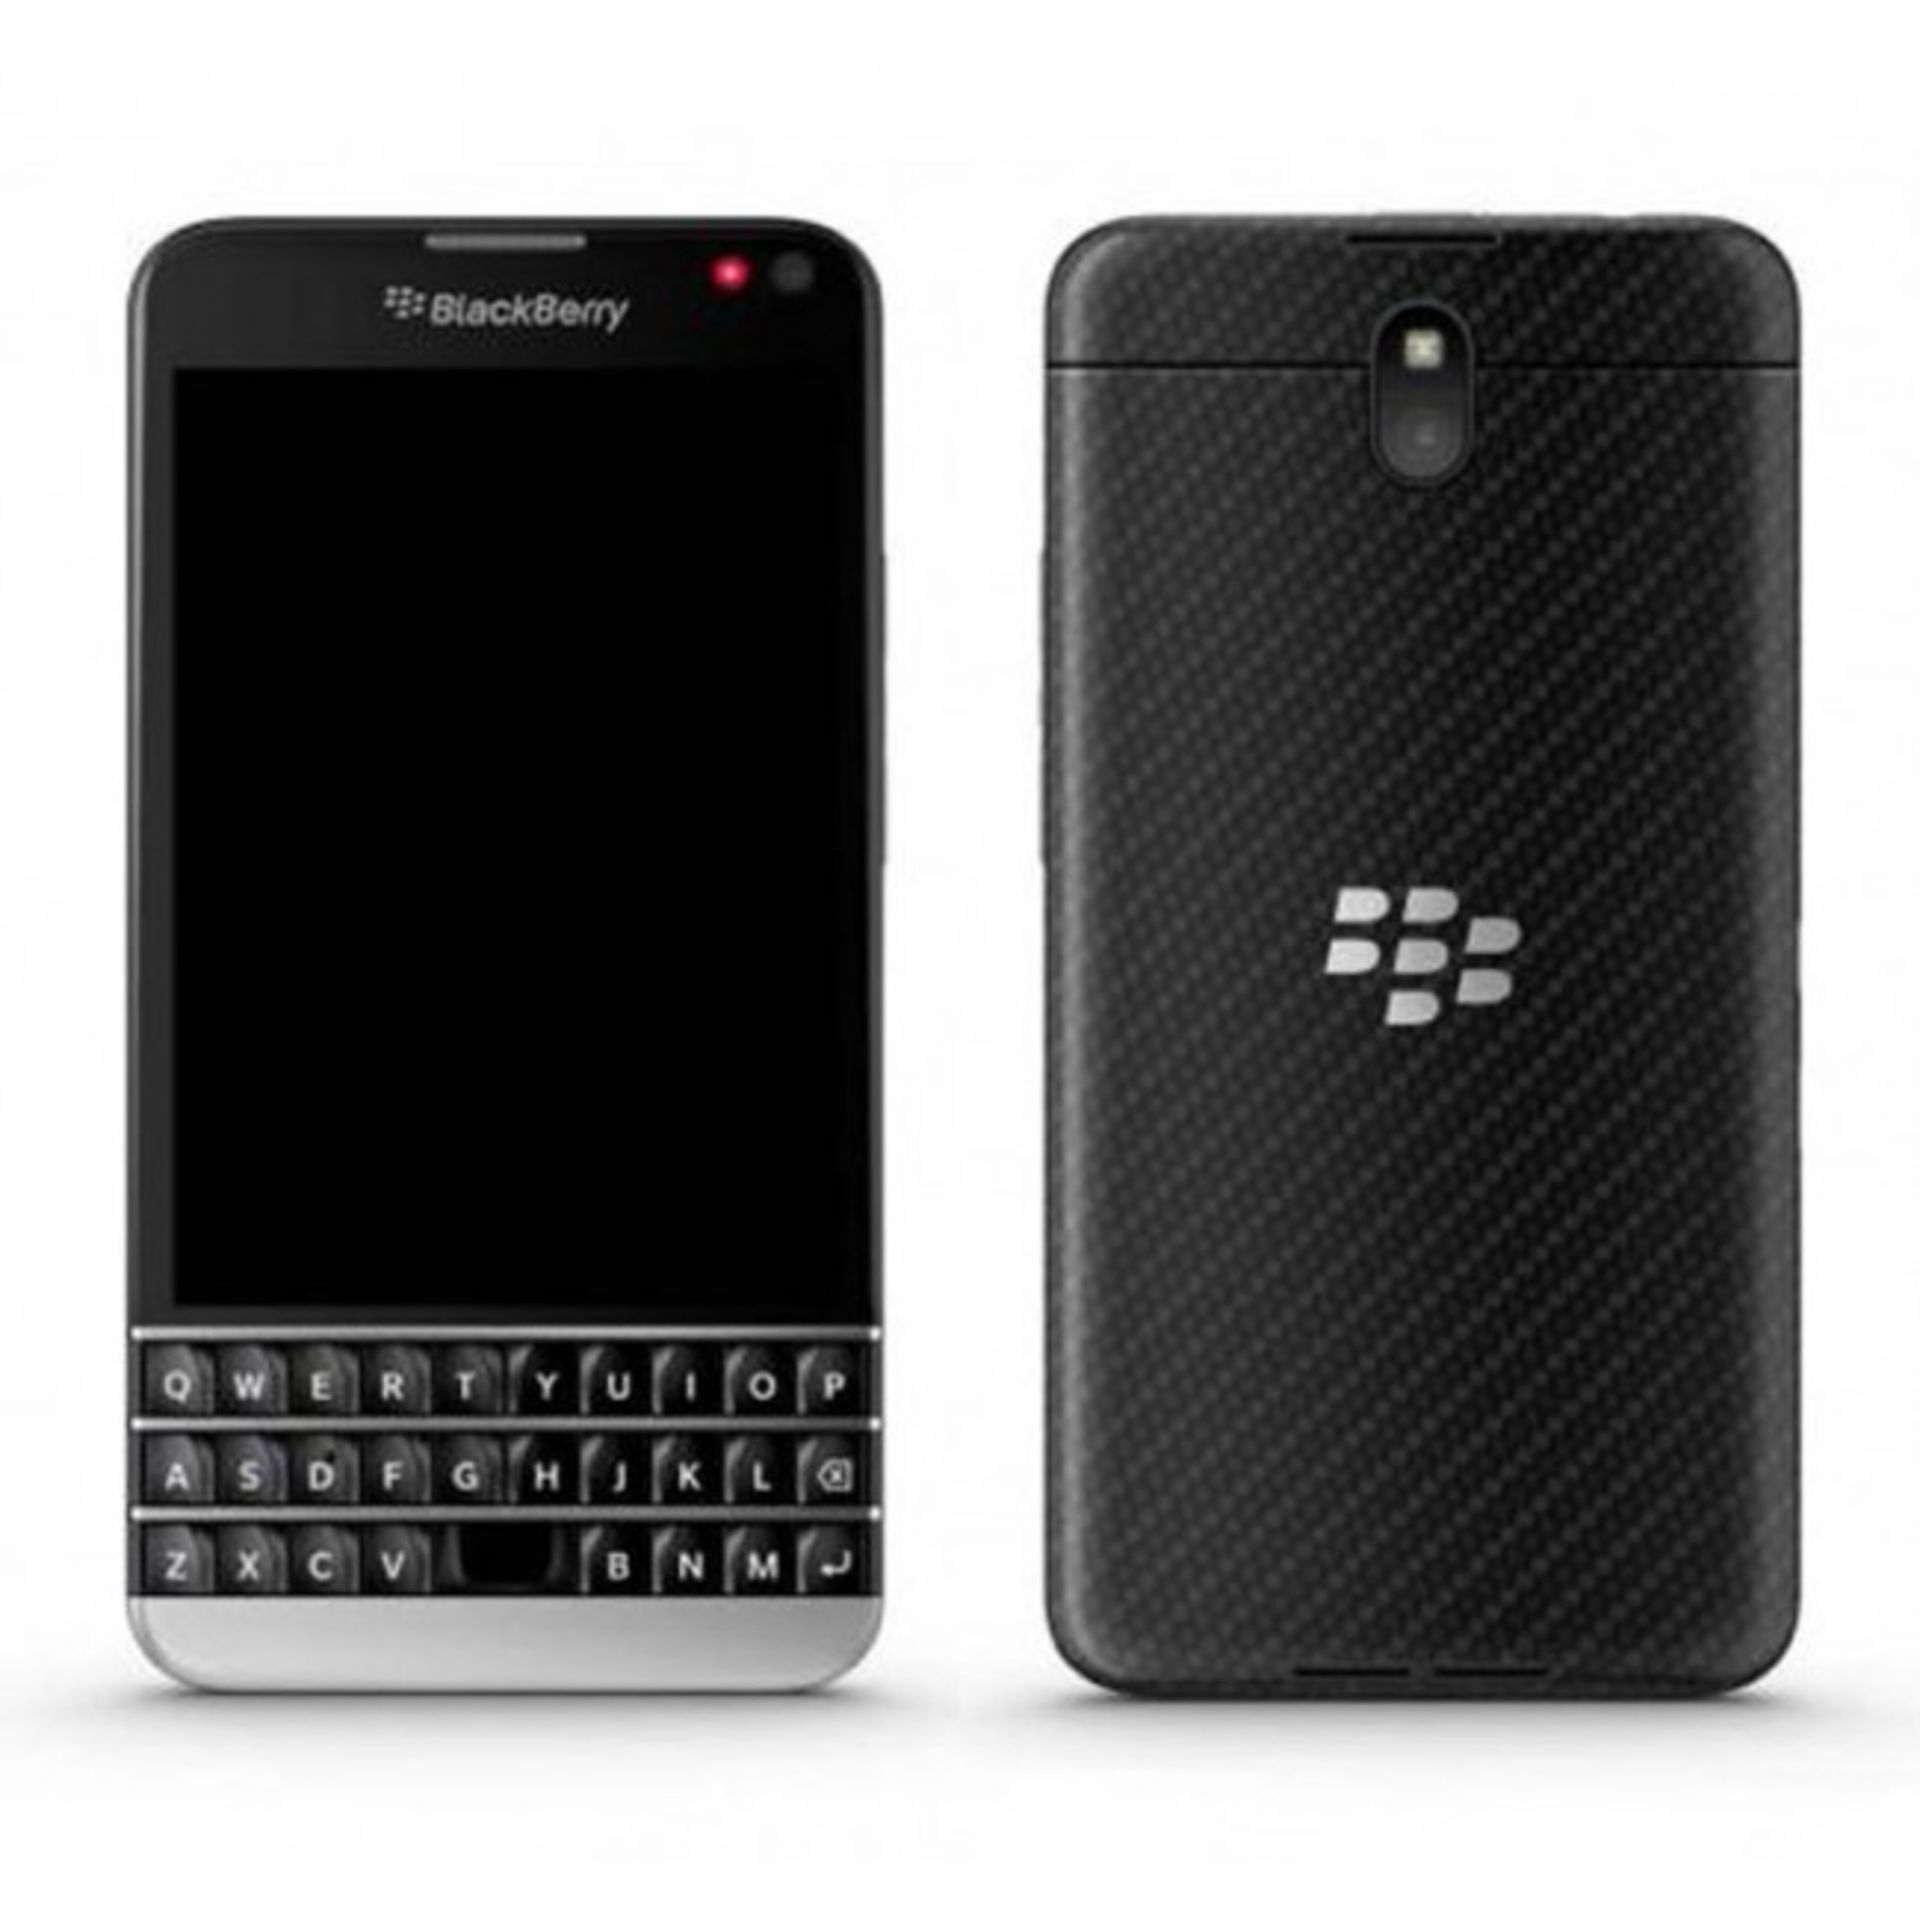 Grade A Blackberry Q30 (Passport) Colours May Vary Item available approx 12 working days after sale